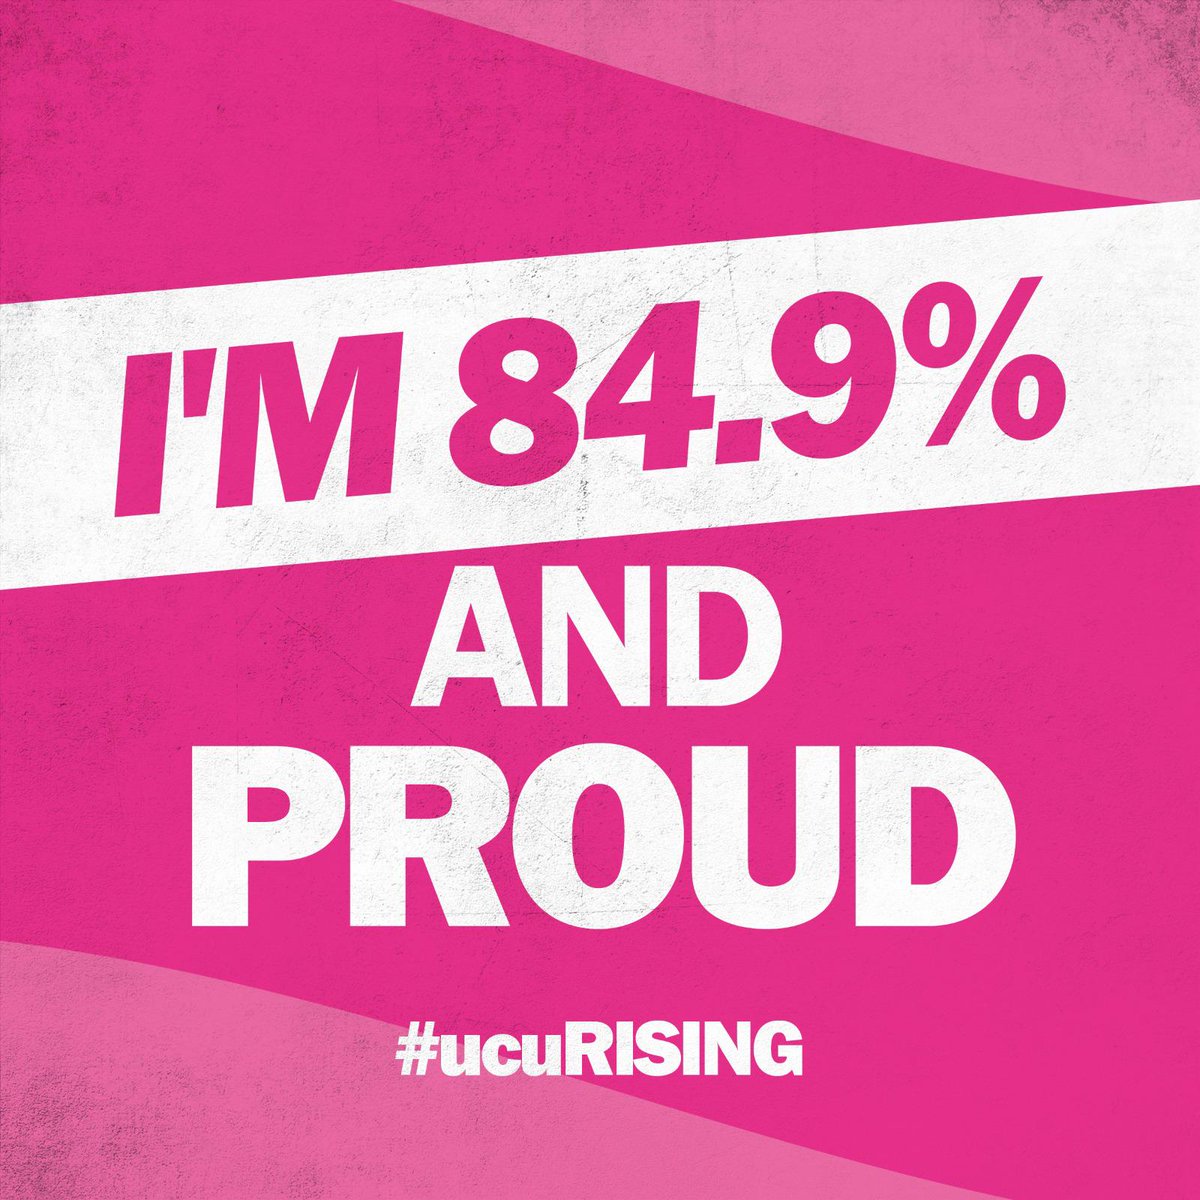 PENSION BALLOT: SMASHED! We’ve delivered an unprecedented turnout and a huge YES vote UCU and proud #ucuRISING